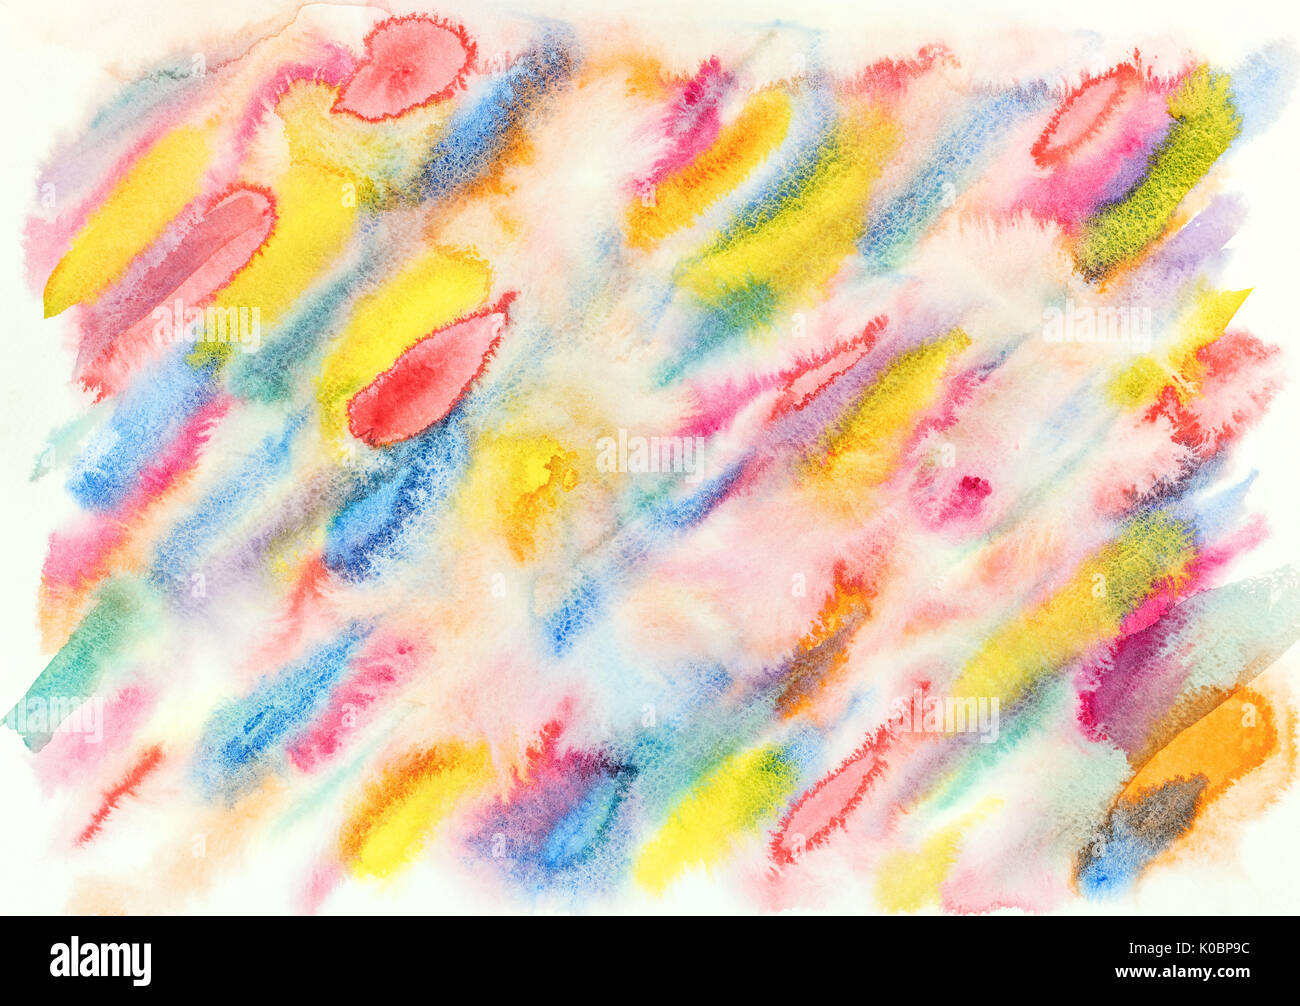 abstract watercolor pattern with bright colorful diagonal yellow, red, blue textured strokes Stock Photo